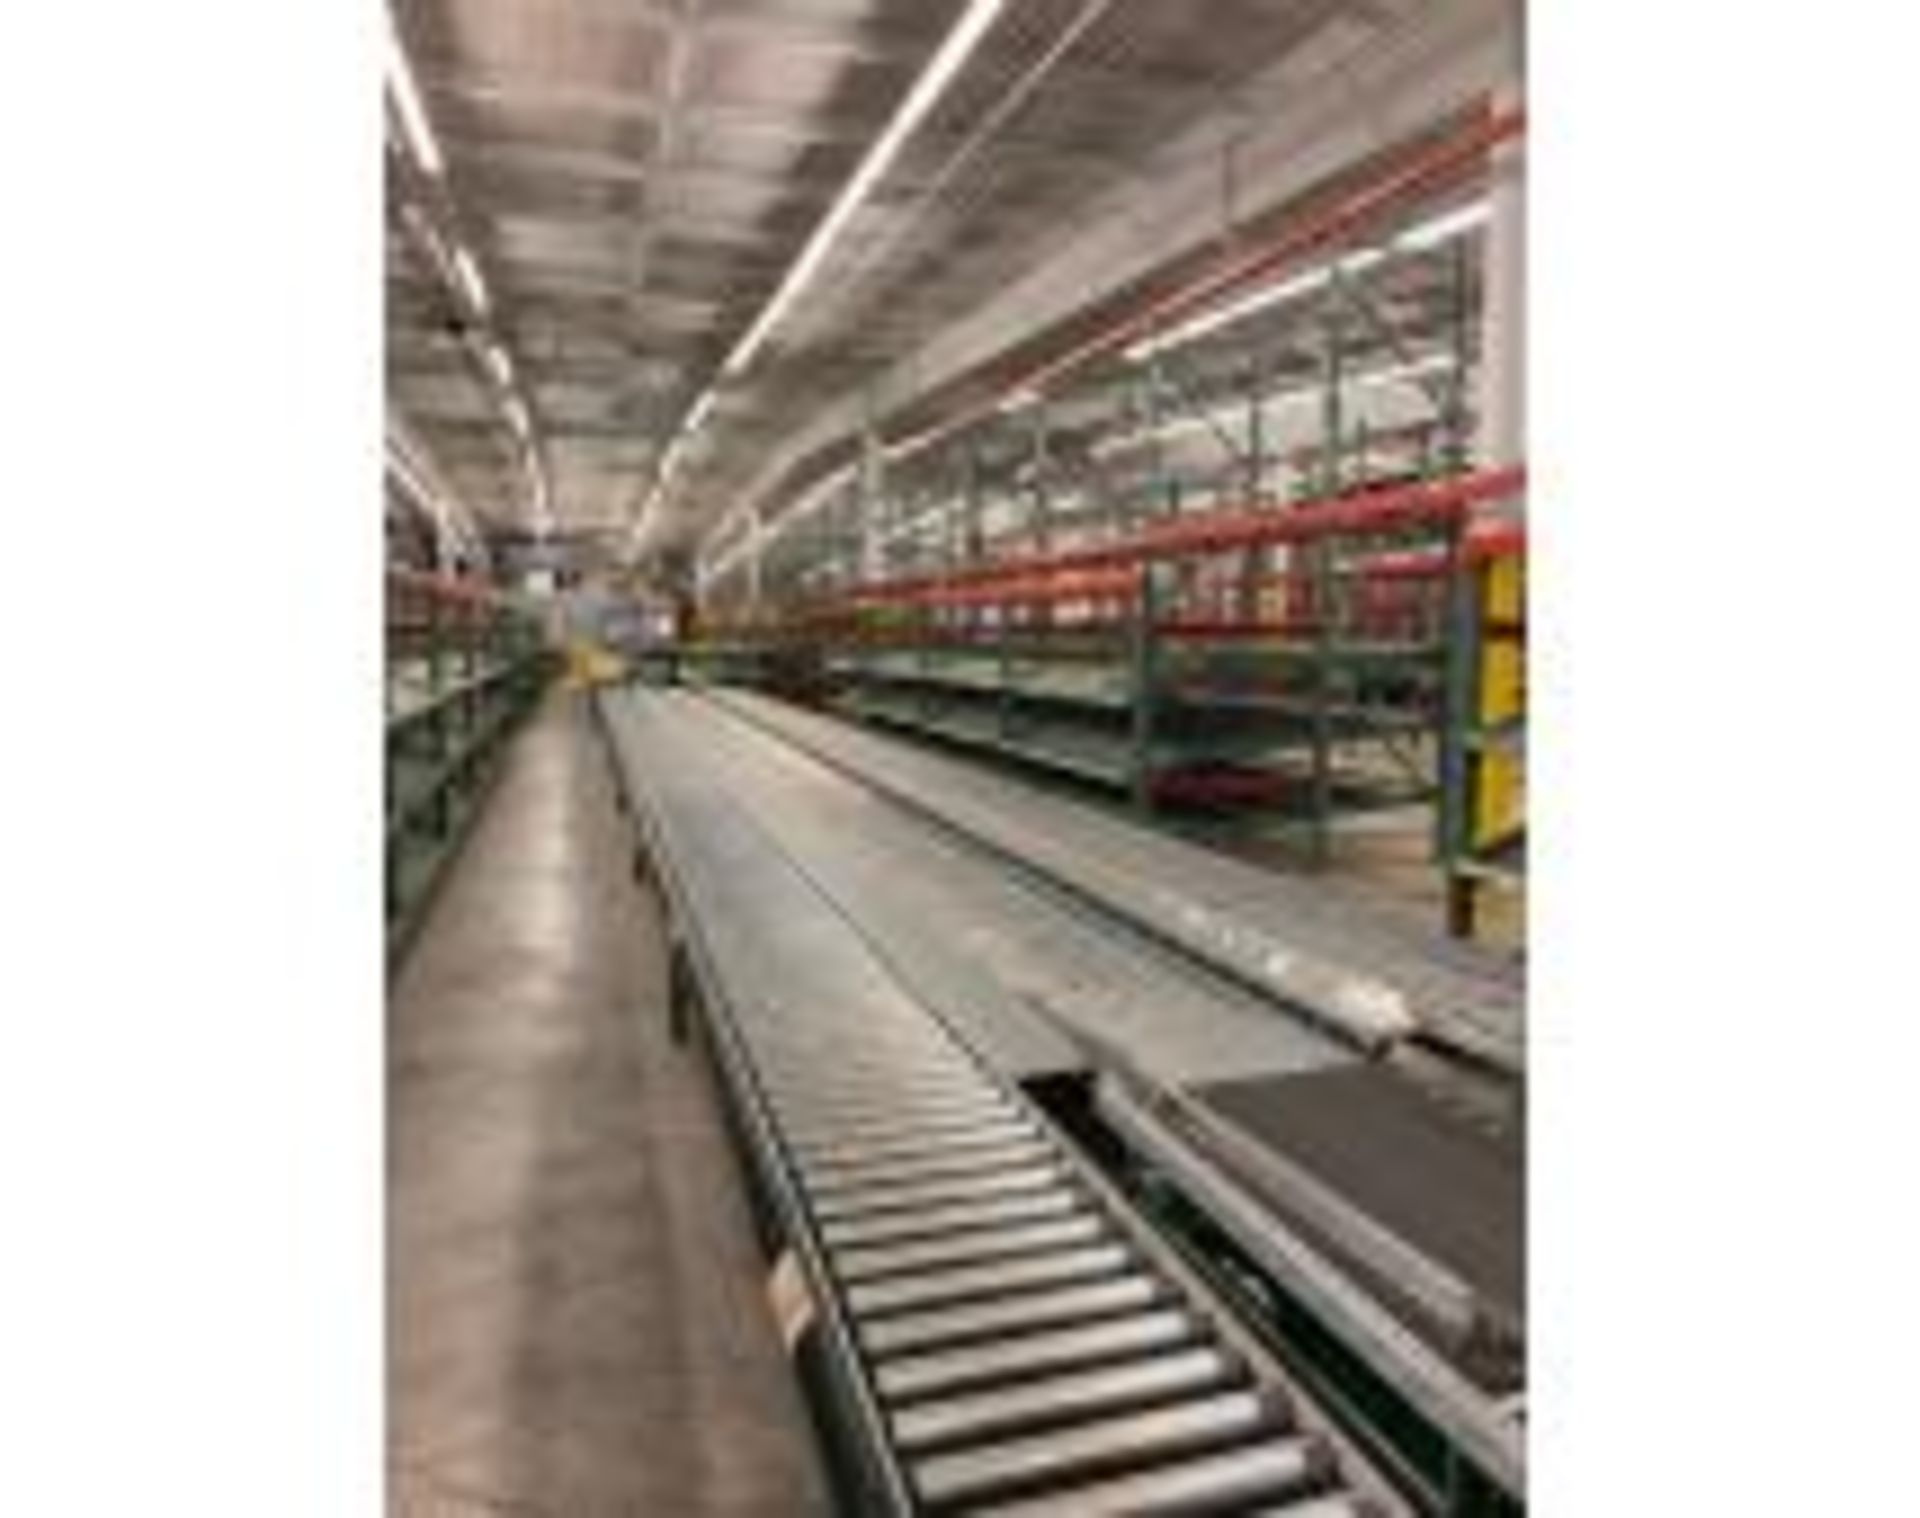 CARTON FLOW; (52) BAYS, 3-LEVELS PER BAY, BAY MEASURES 8' X 8' DEEP, INCLUDES ALL ROLLERS, IMPACT